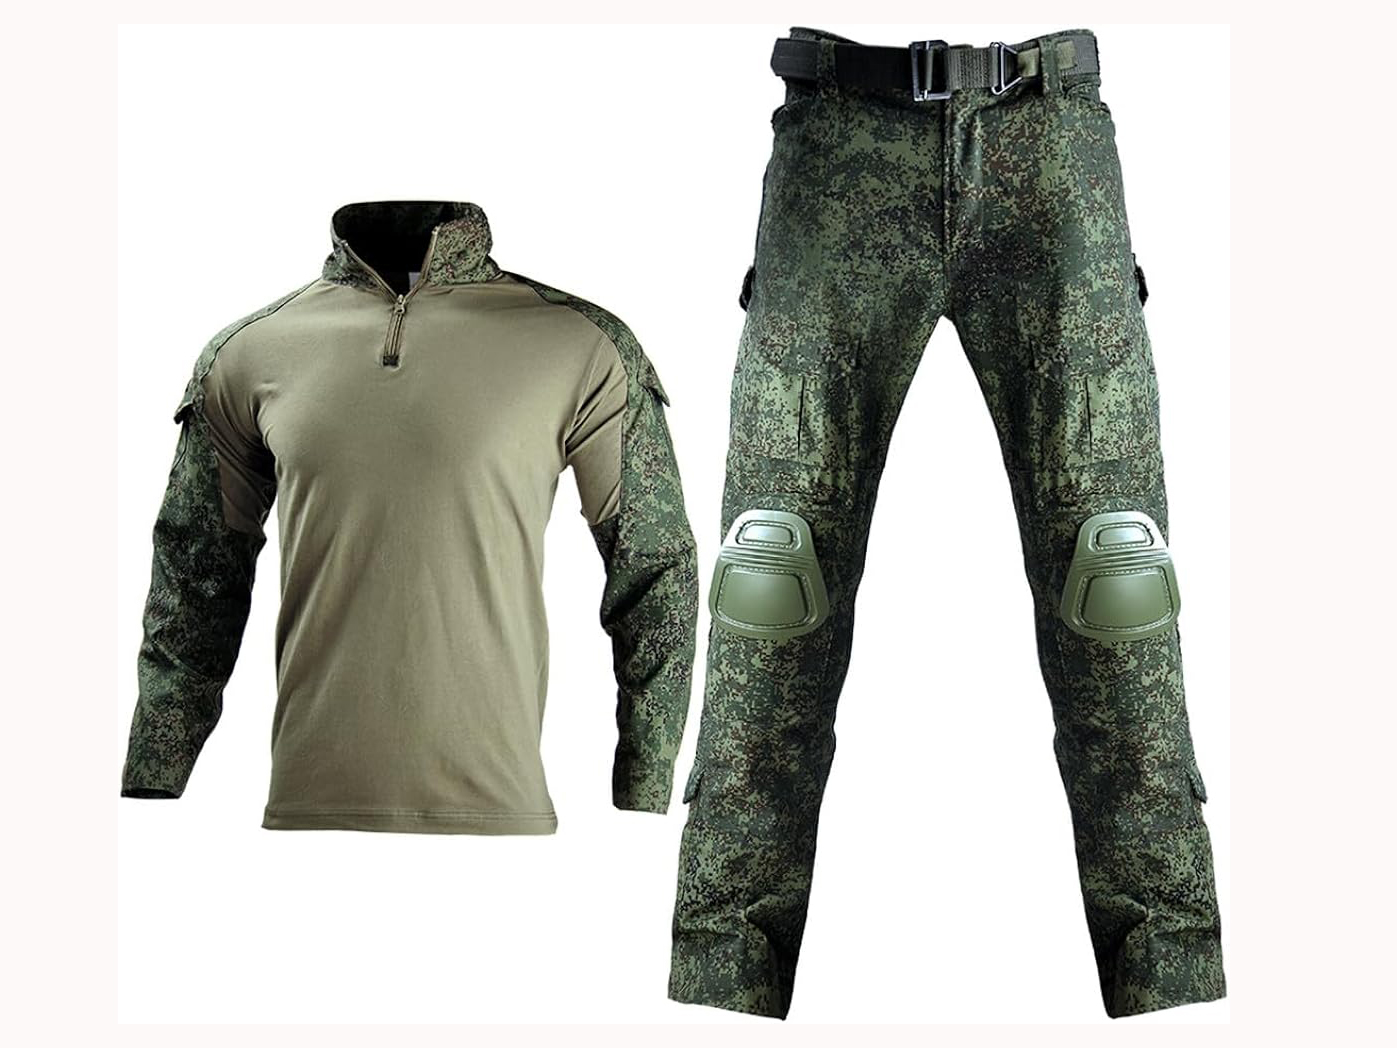 Paintball Suits: Merging Functionality with Protection